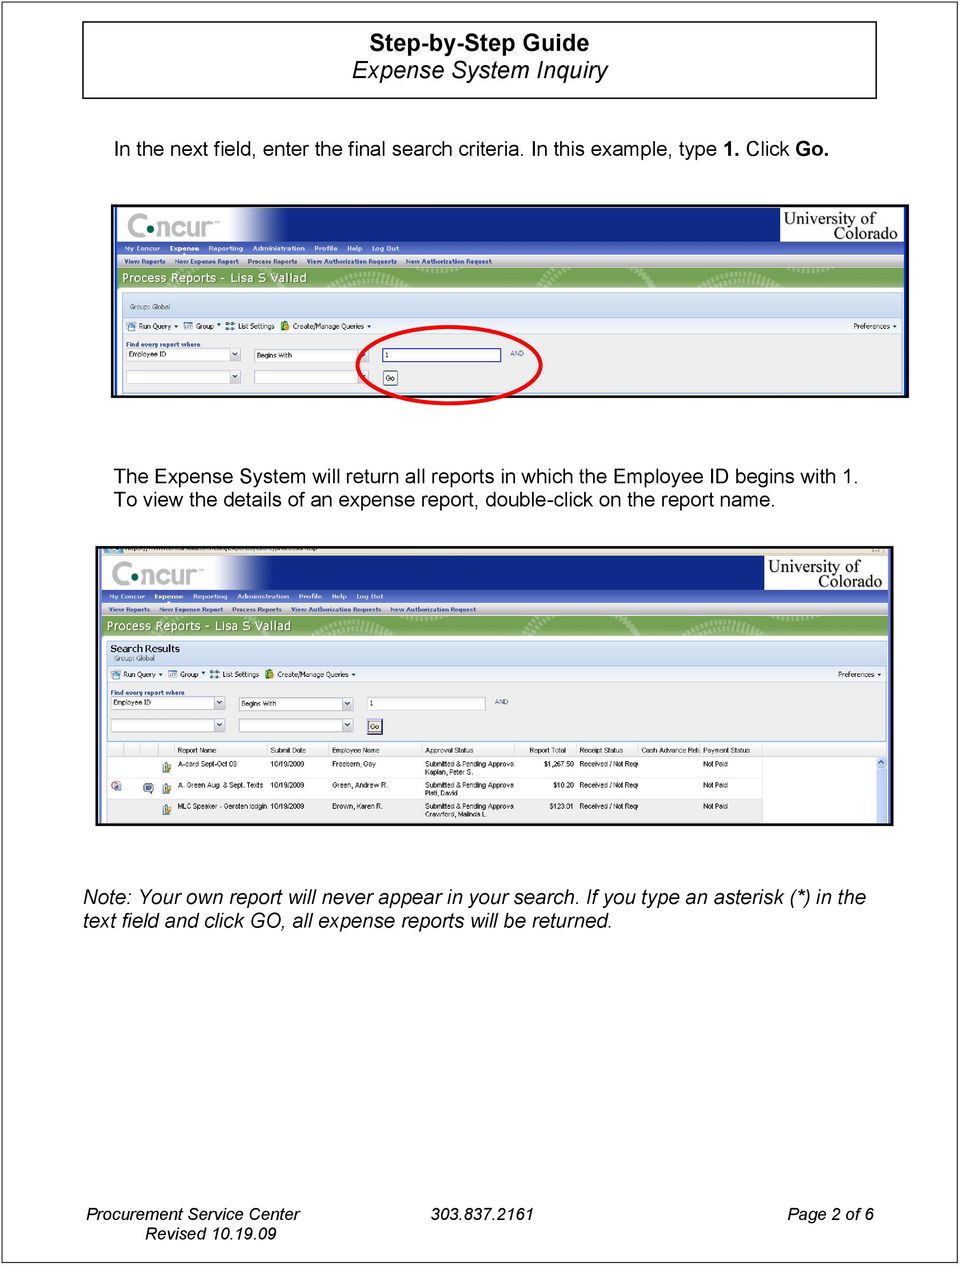 To view the details of an expense report, double-click on the report name.